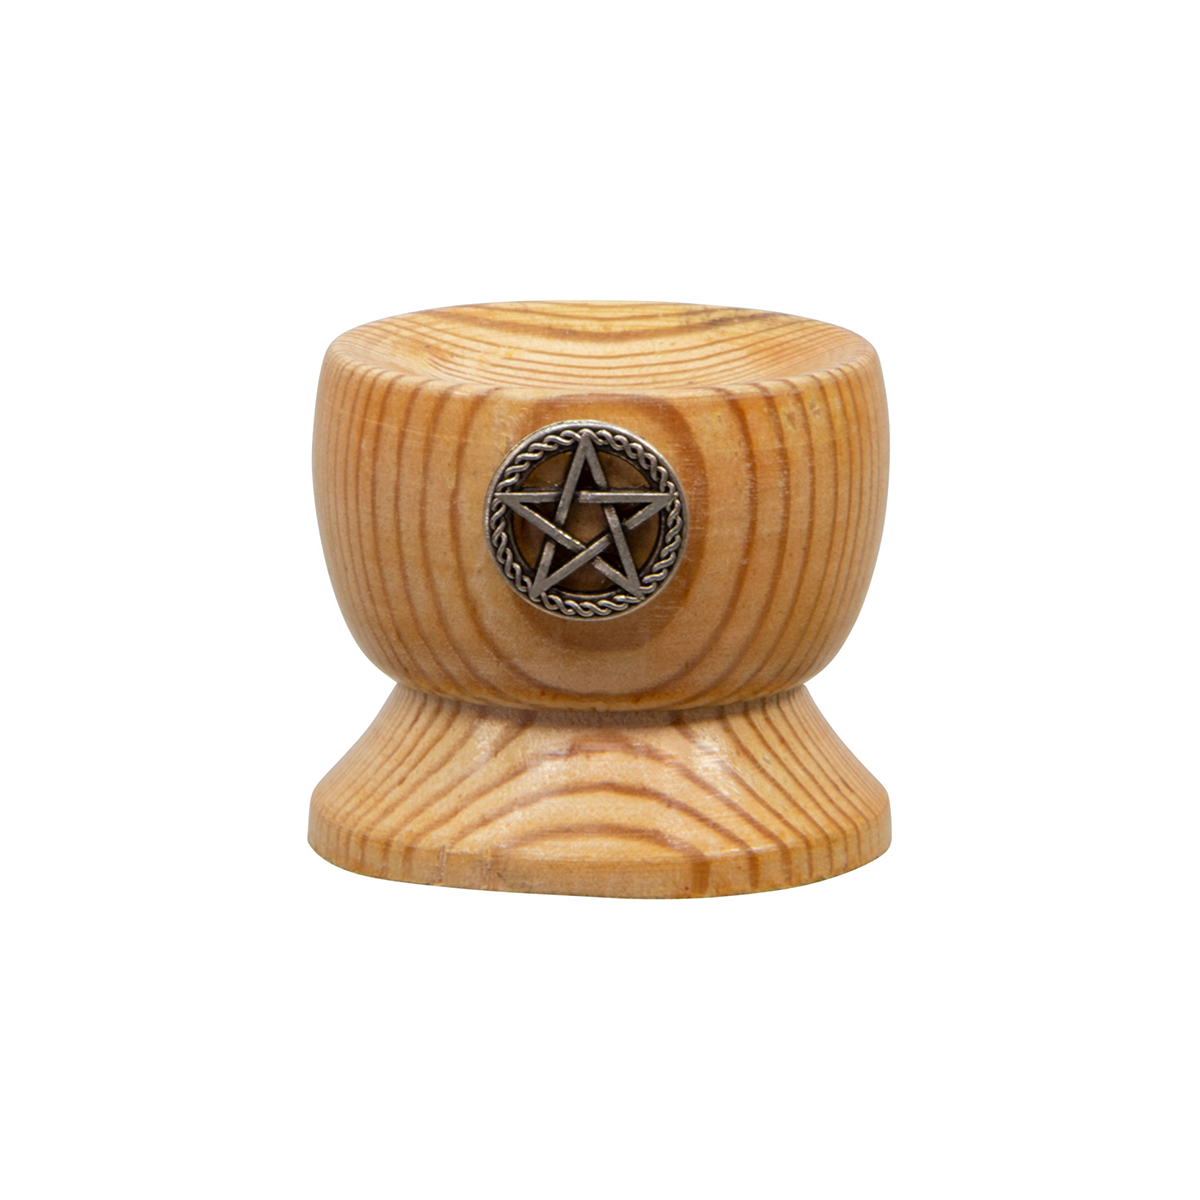 Wooden sphere holder with pentacle